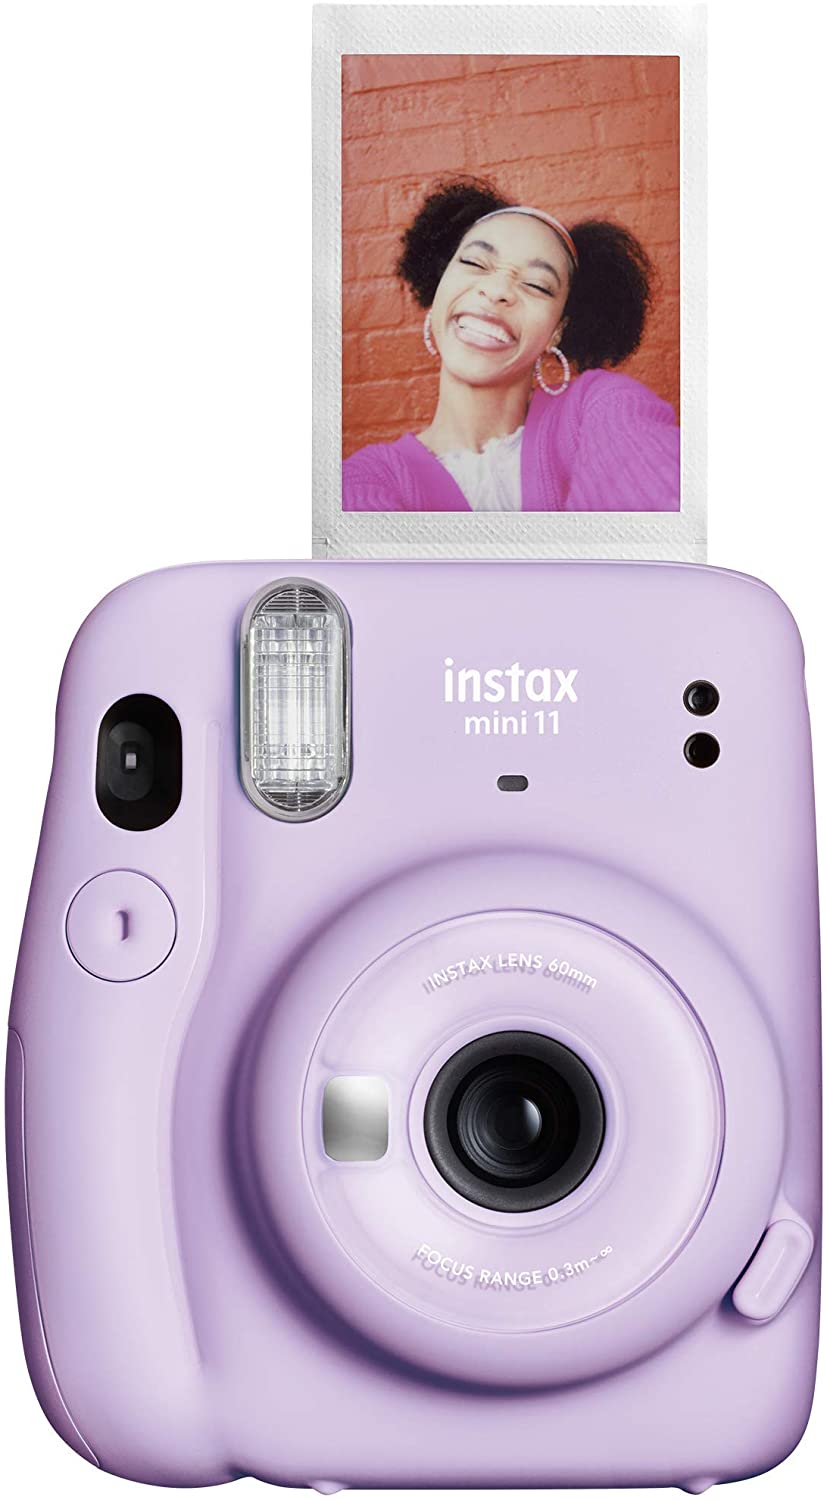 Fujifilm Instax Mini 11 Lilac Purple Camera with Fuji Instant Film Twin Pack (40 Pictures) + Purple Case, Album, Stickers, Color Lenses and More Accessories Bundle - image 4 of 7